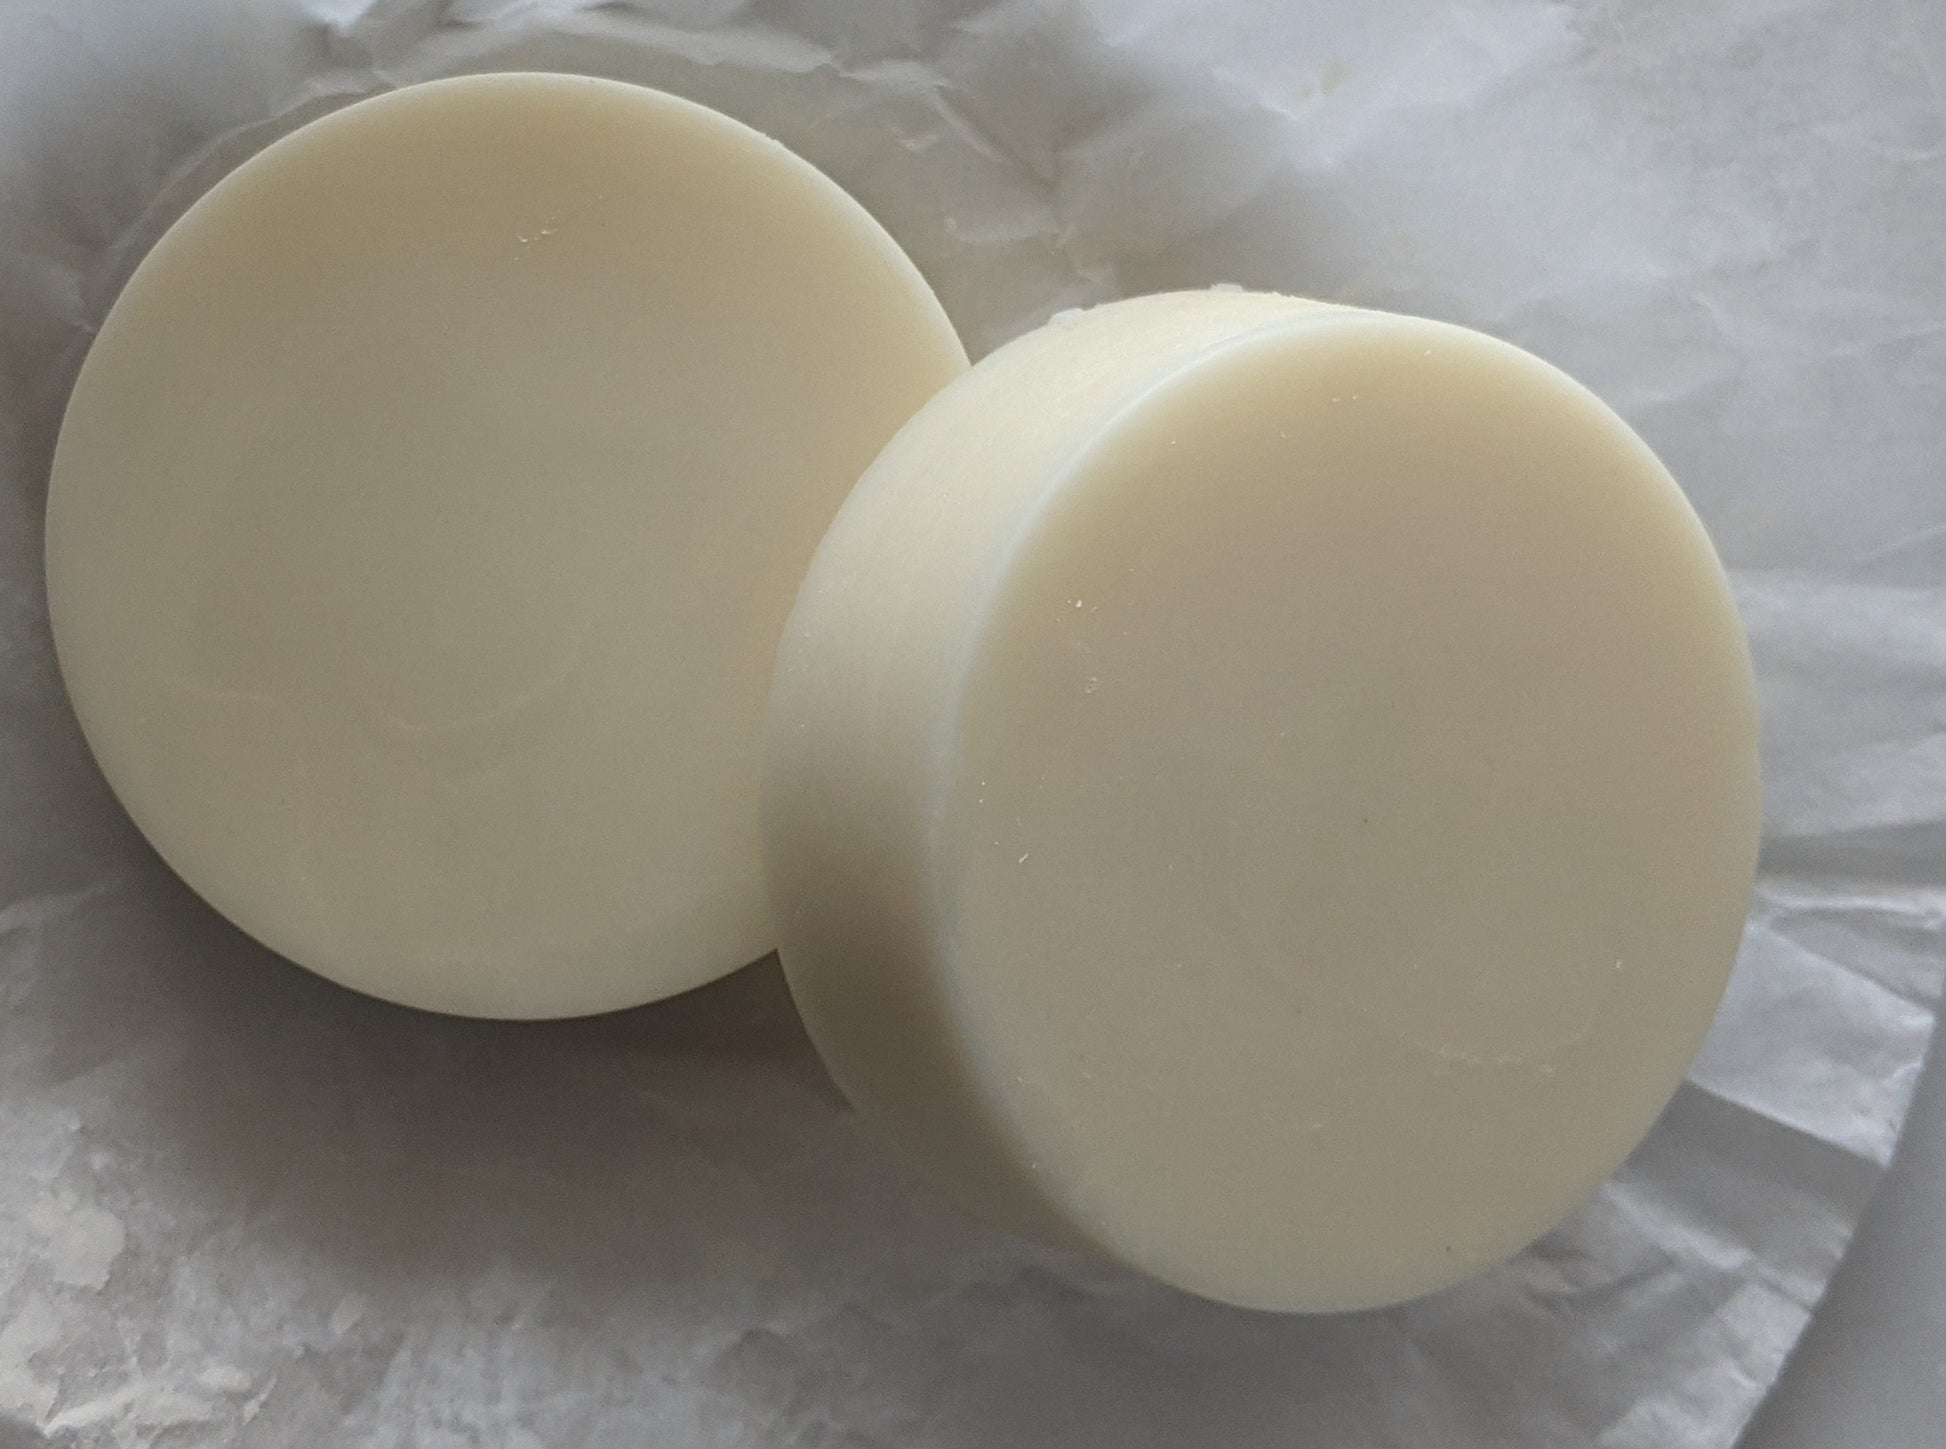 Lotion bars are very intense ways of getting moisture to your chapped skin.  It is made without water and only with the finest butters and oils that have nourishing properties.  These are perfect for everyday activity such as gardening or other outdoor recreational activity as well as helping with eczema dry spots.